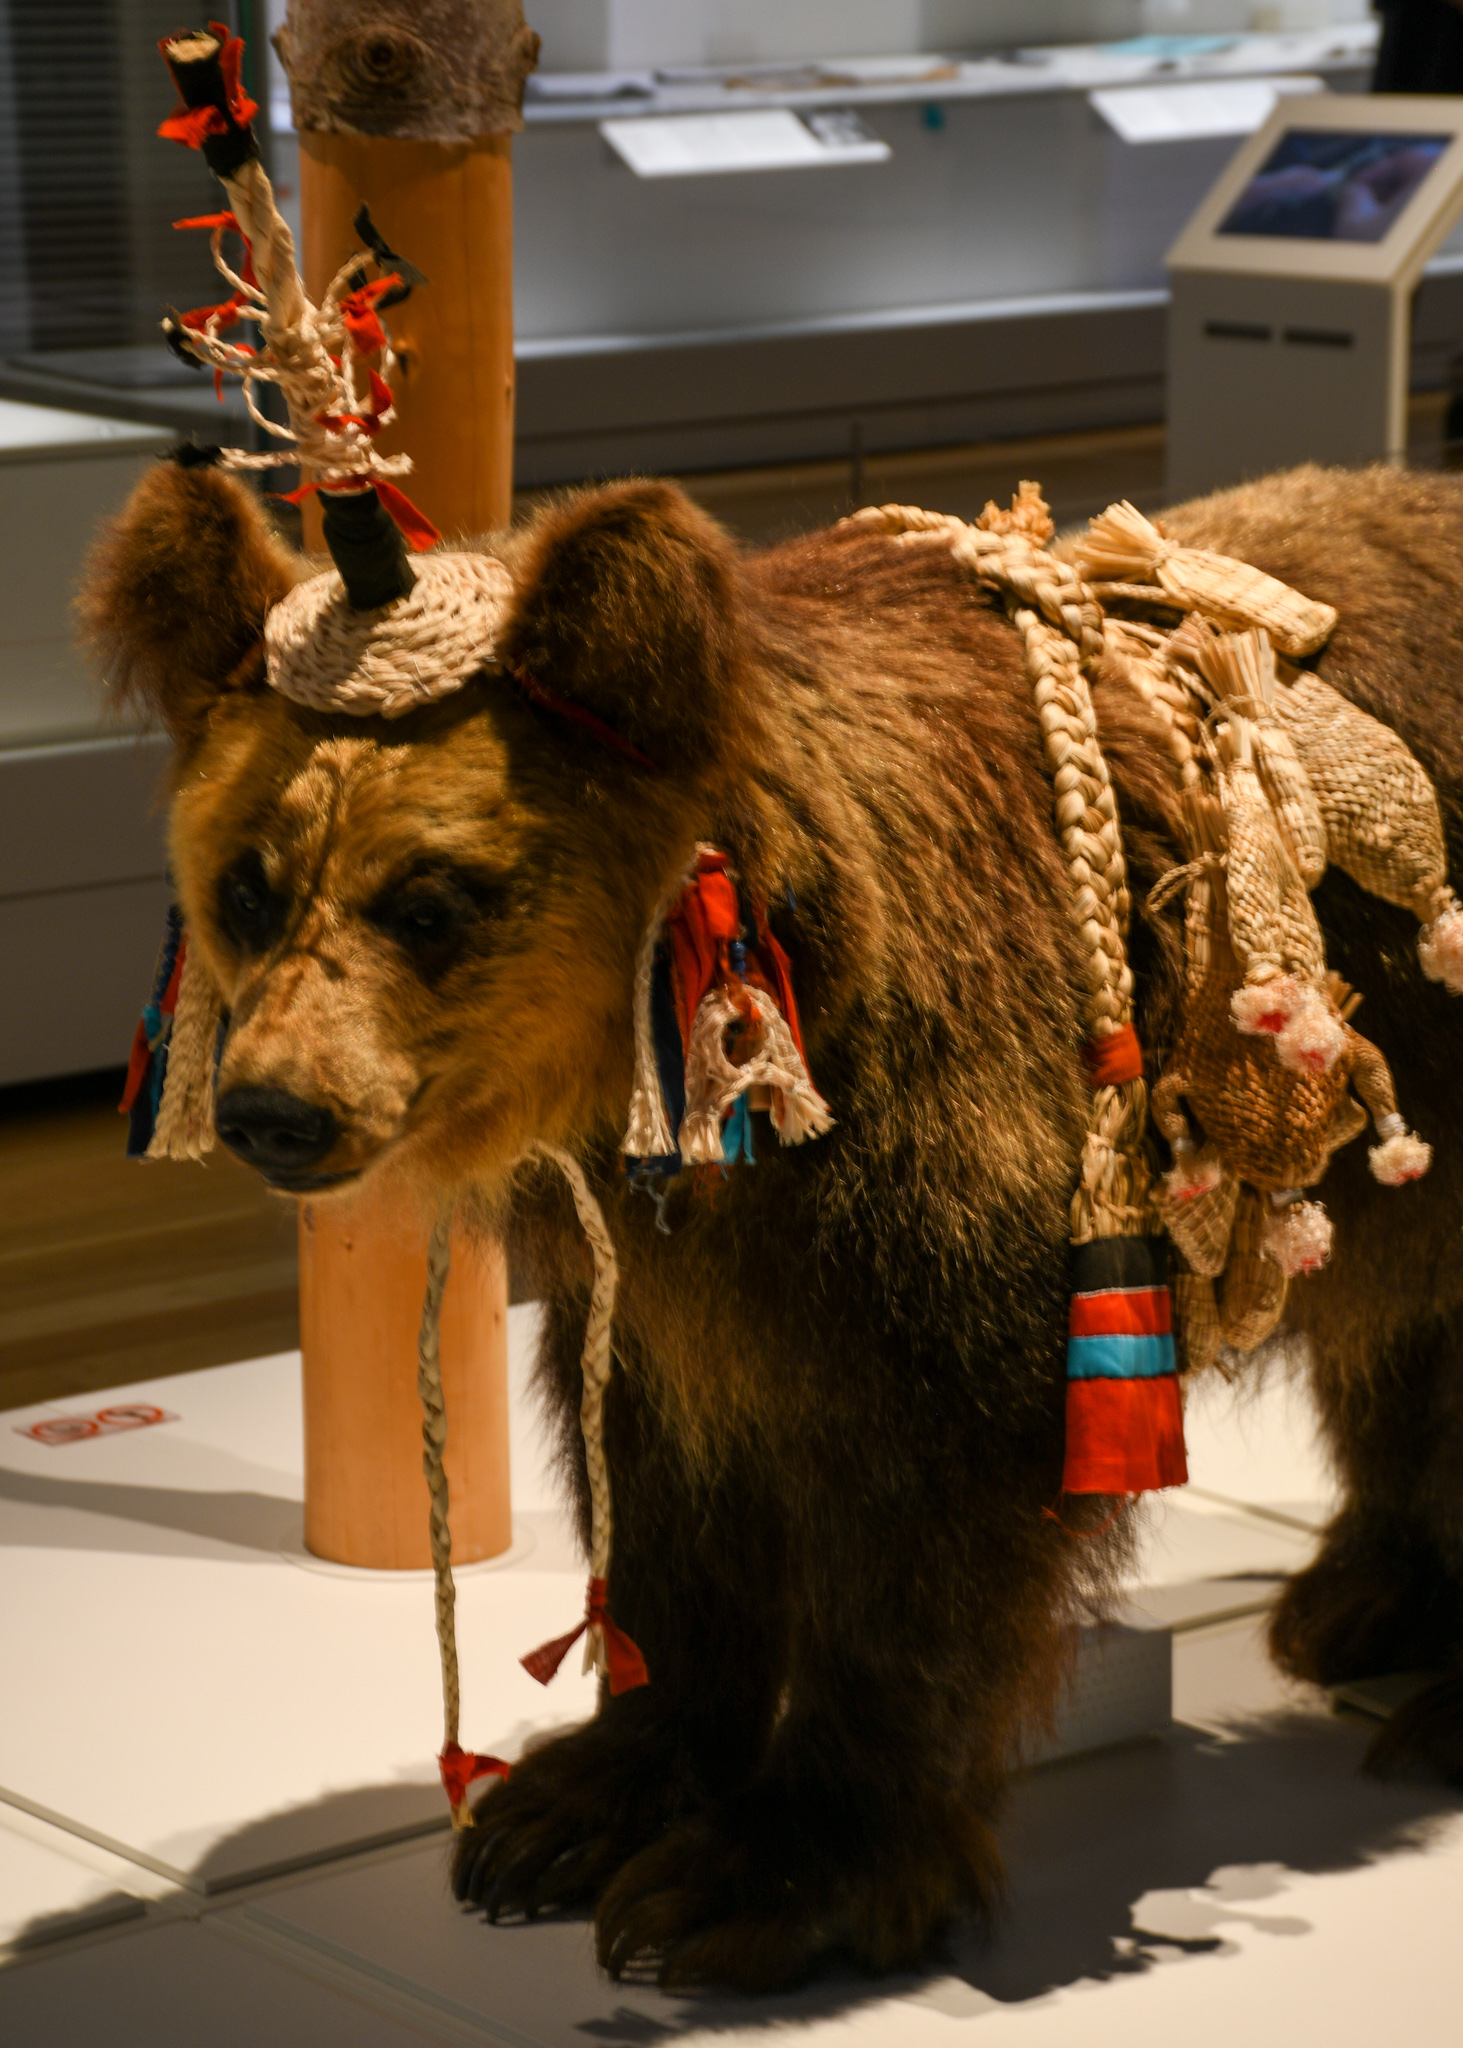 Ainu culture is introduced through a range of displays. 